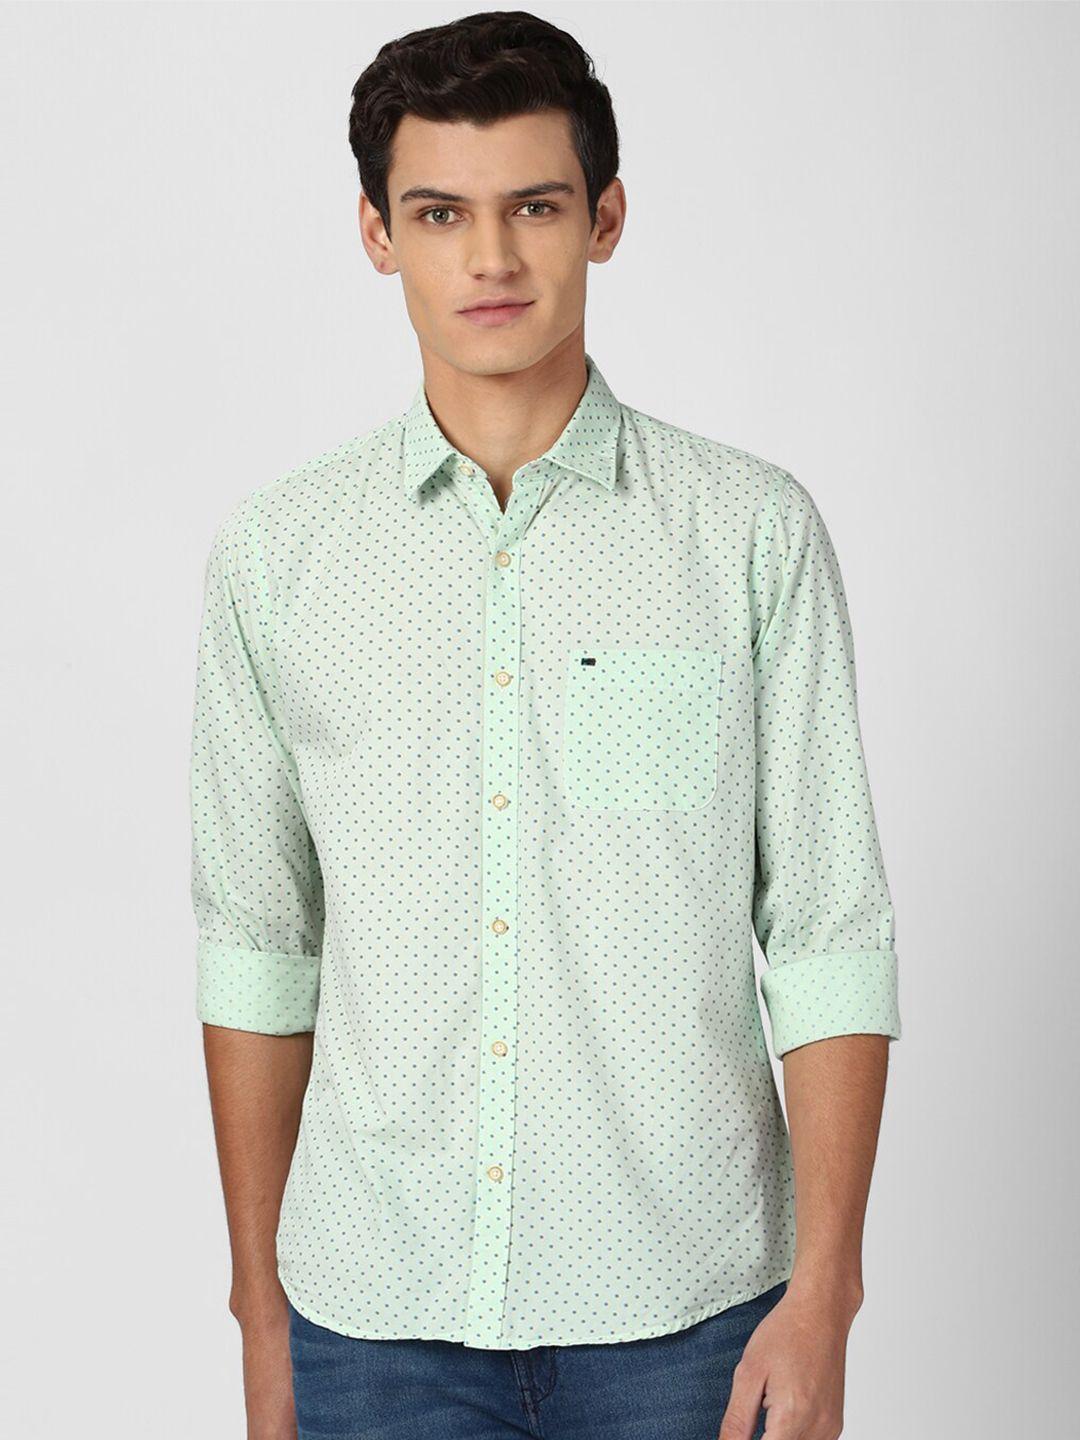 peter england casuals men green slim fit printed cotton casual shirt